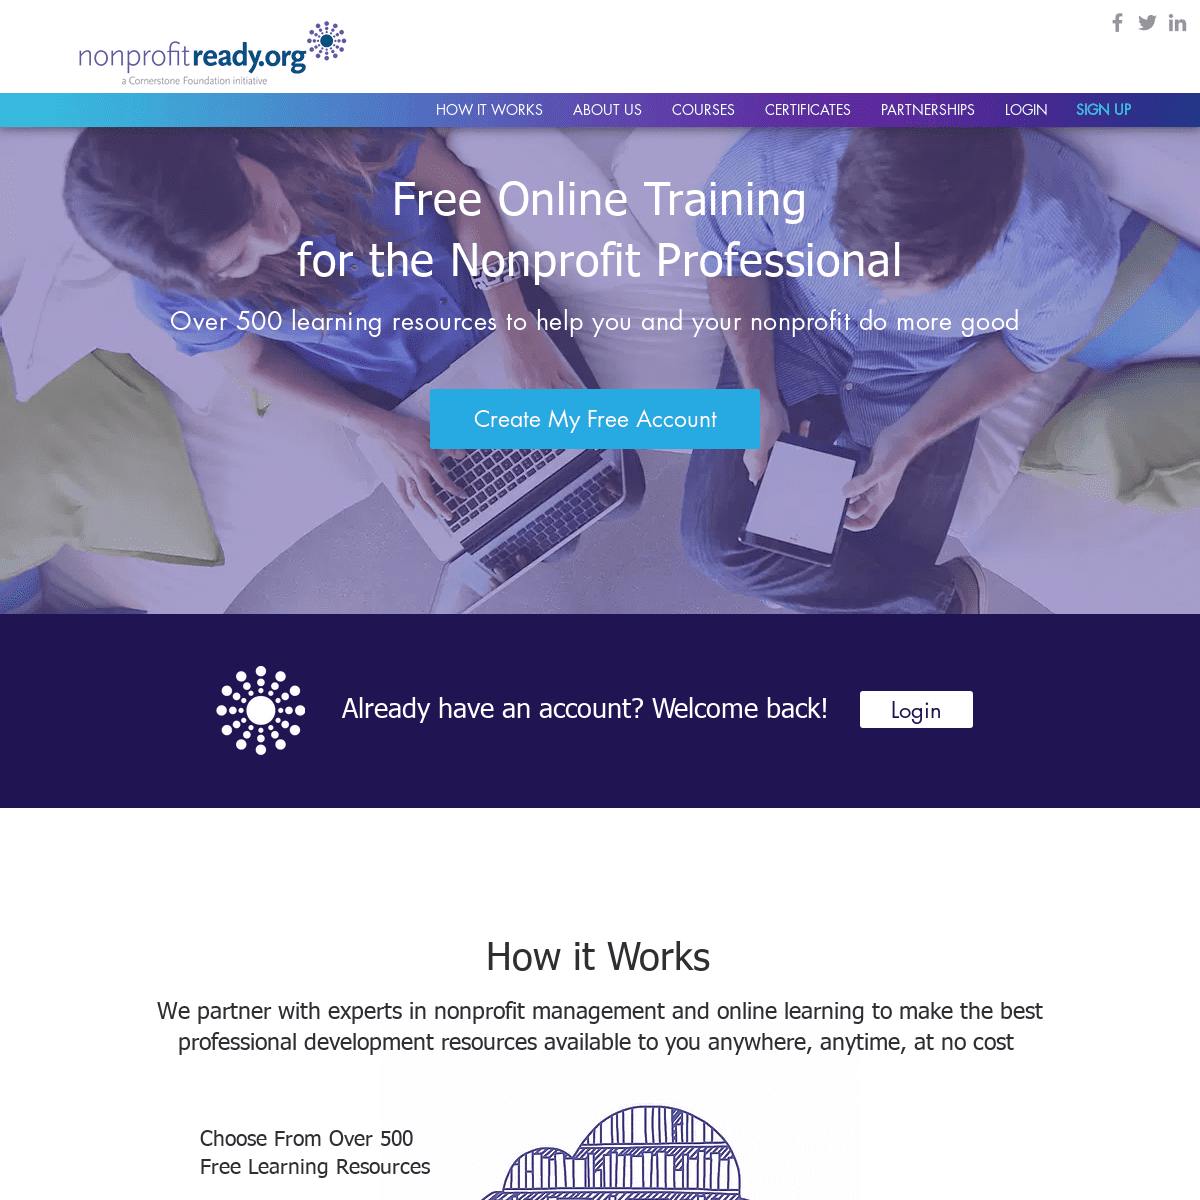 A complete backup of https://nonprofitready.org